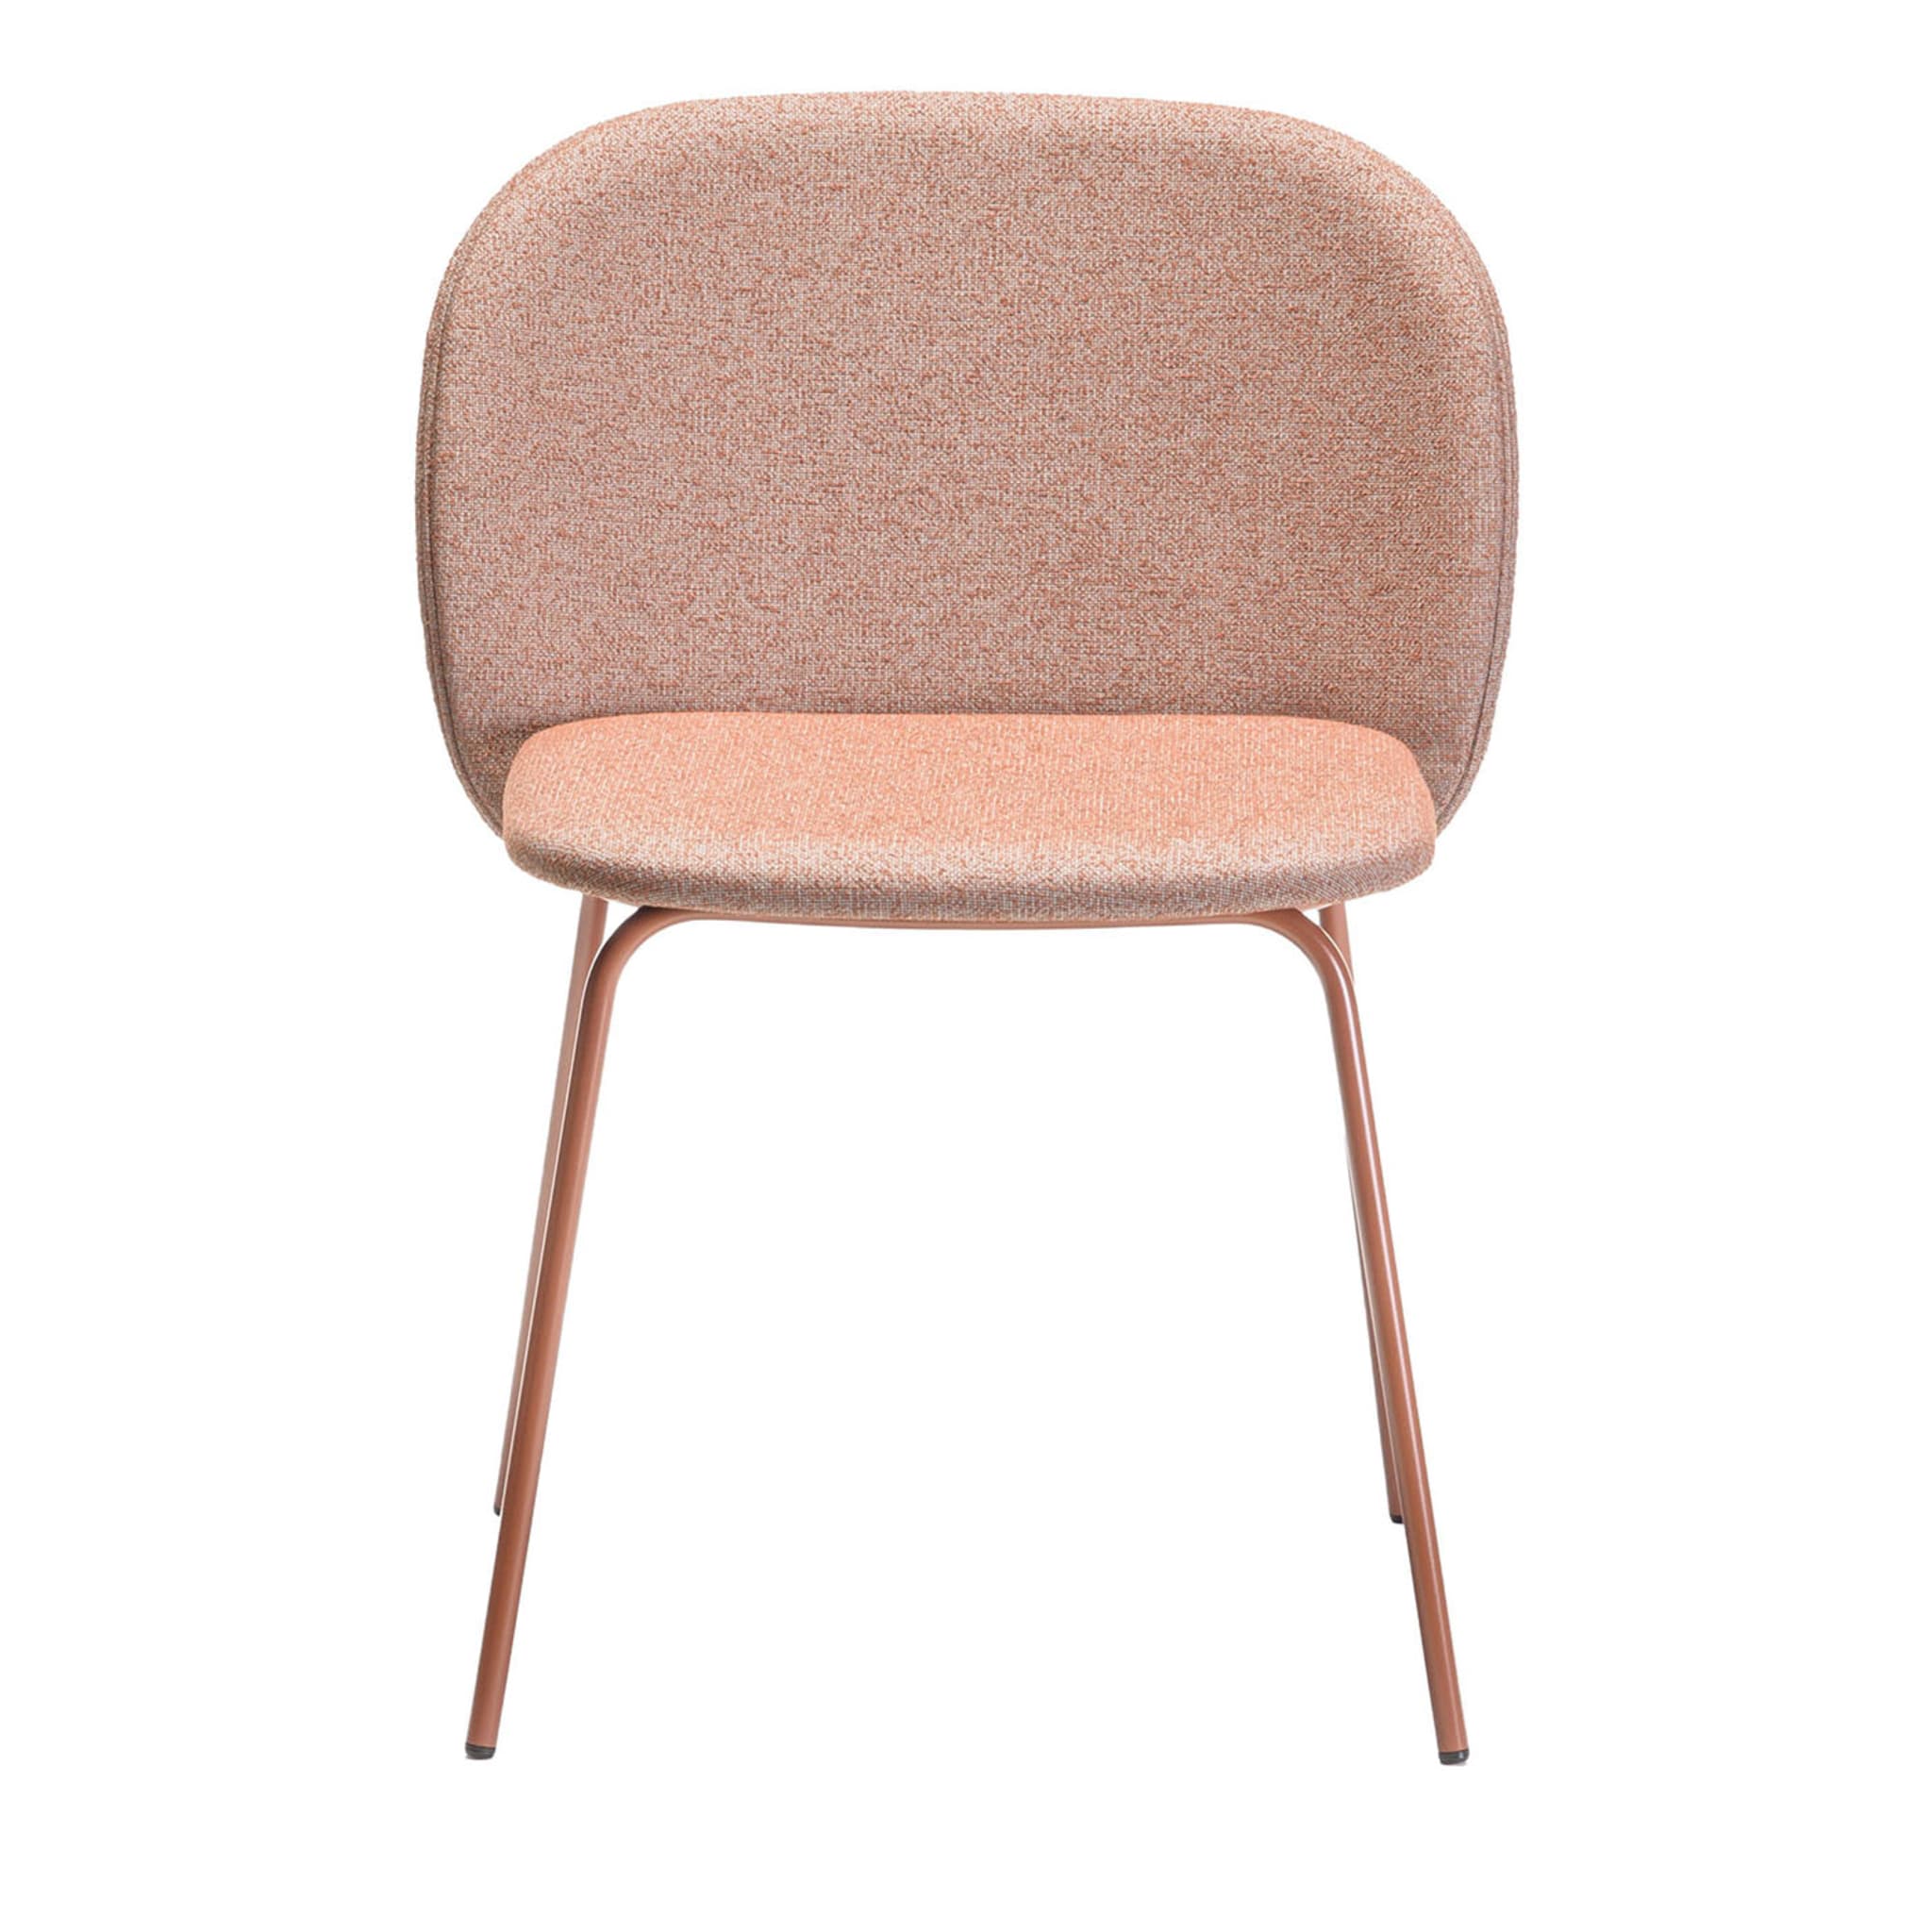 Chips M Terracotta Chair By Studio Pastina - Main view